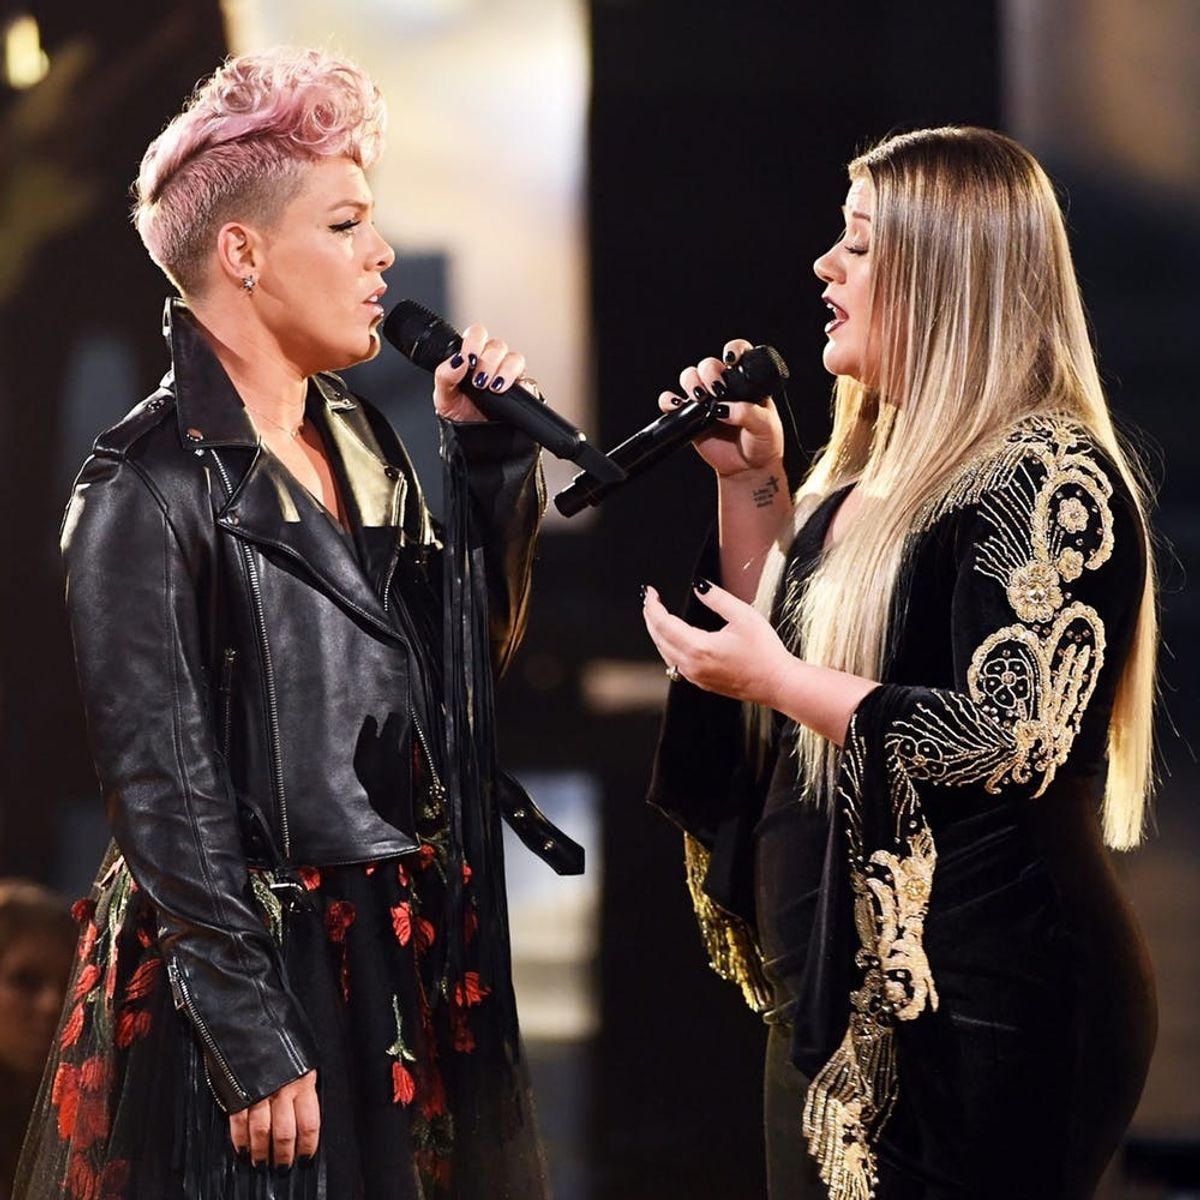 Pink and Kelly Clarkson Opened the AMAs With a Tribute to First Responders That’ll Make You Weep